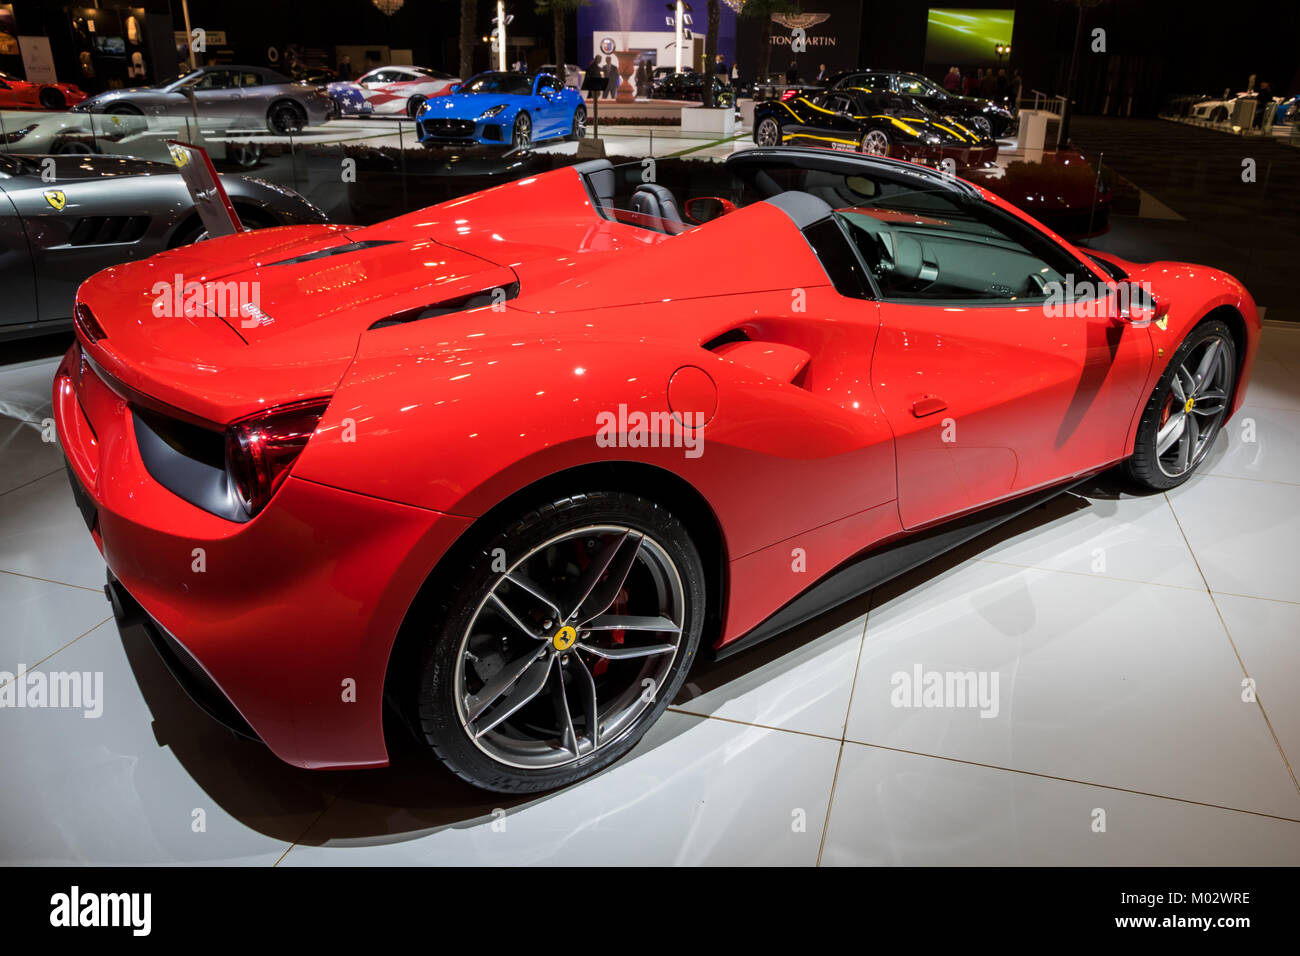 BRUSSELS - JAN 10, 2018: Ferrari 488 Spider sports car showcased at the Brussels Motor Show. Stock Photo